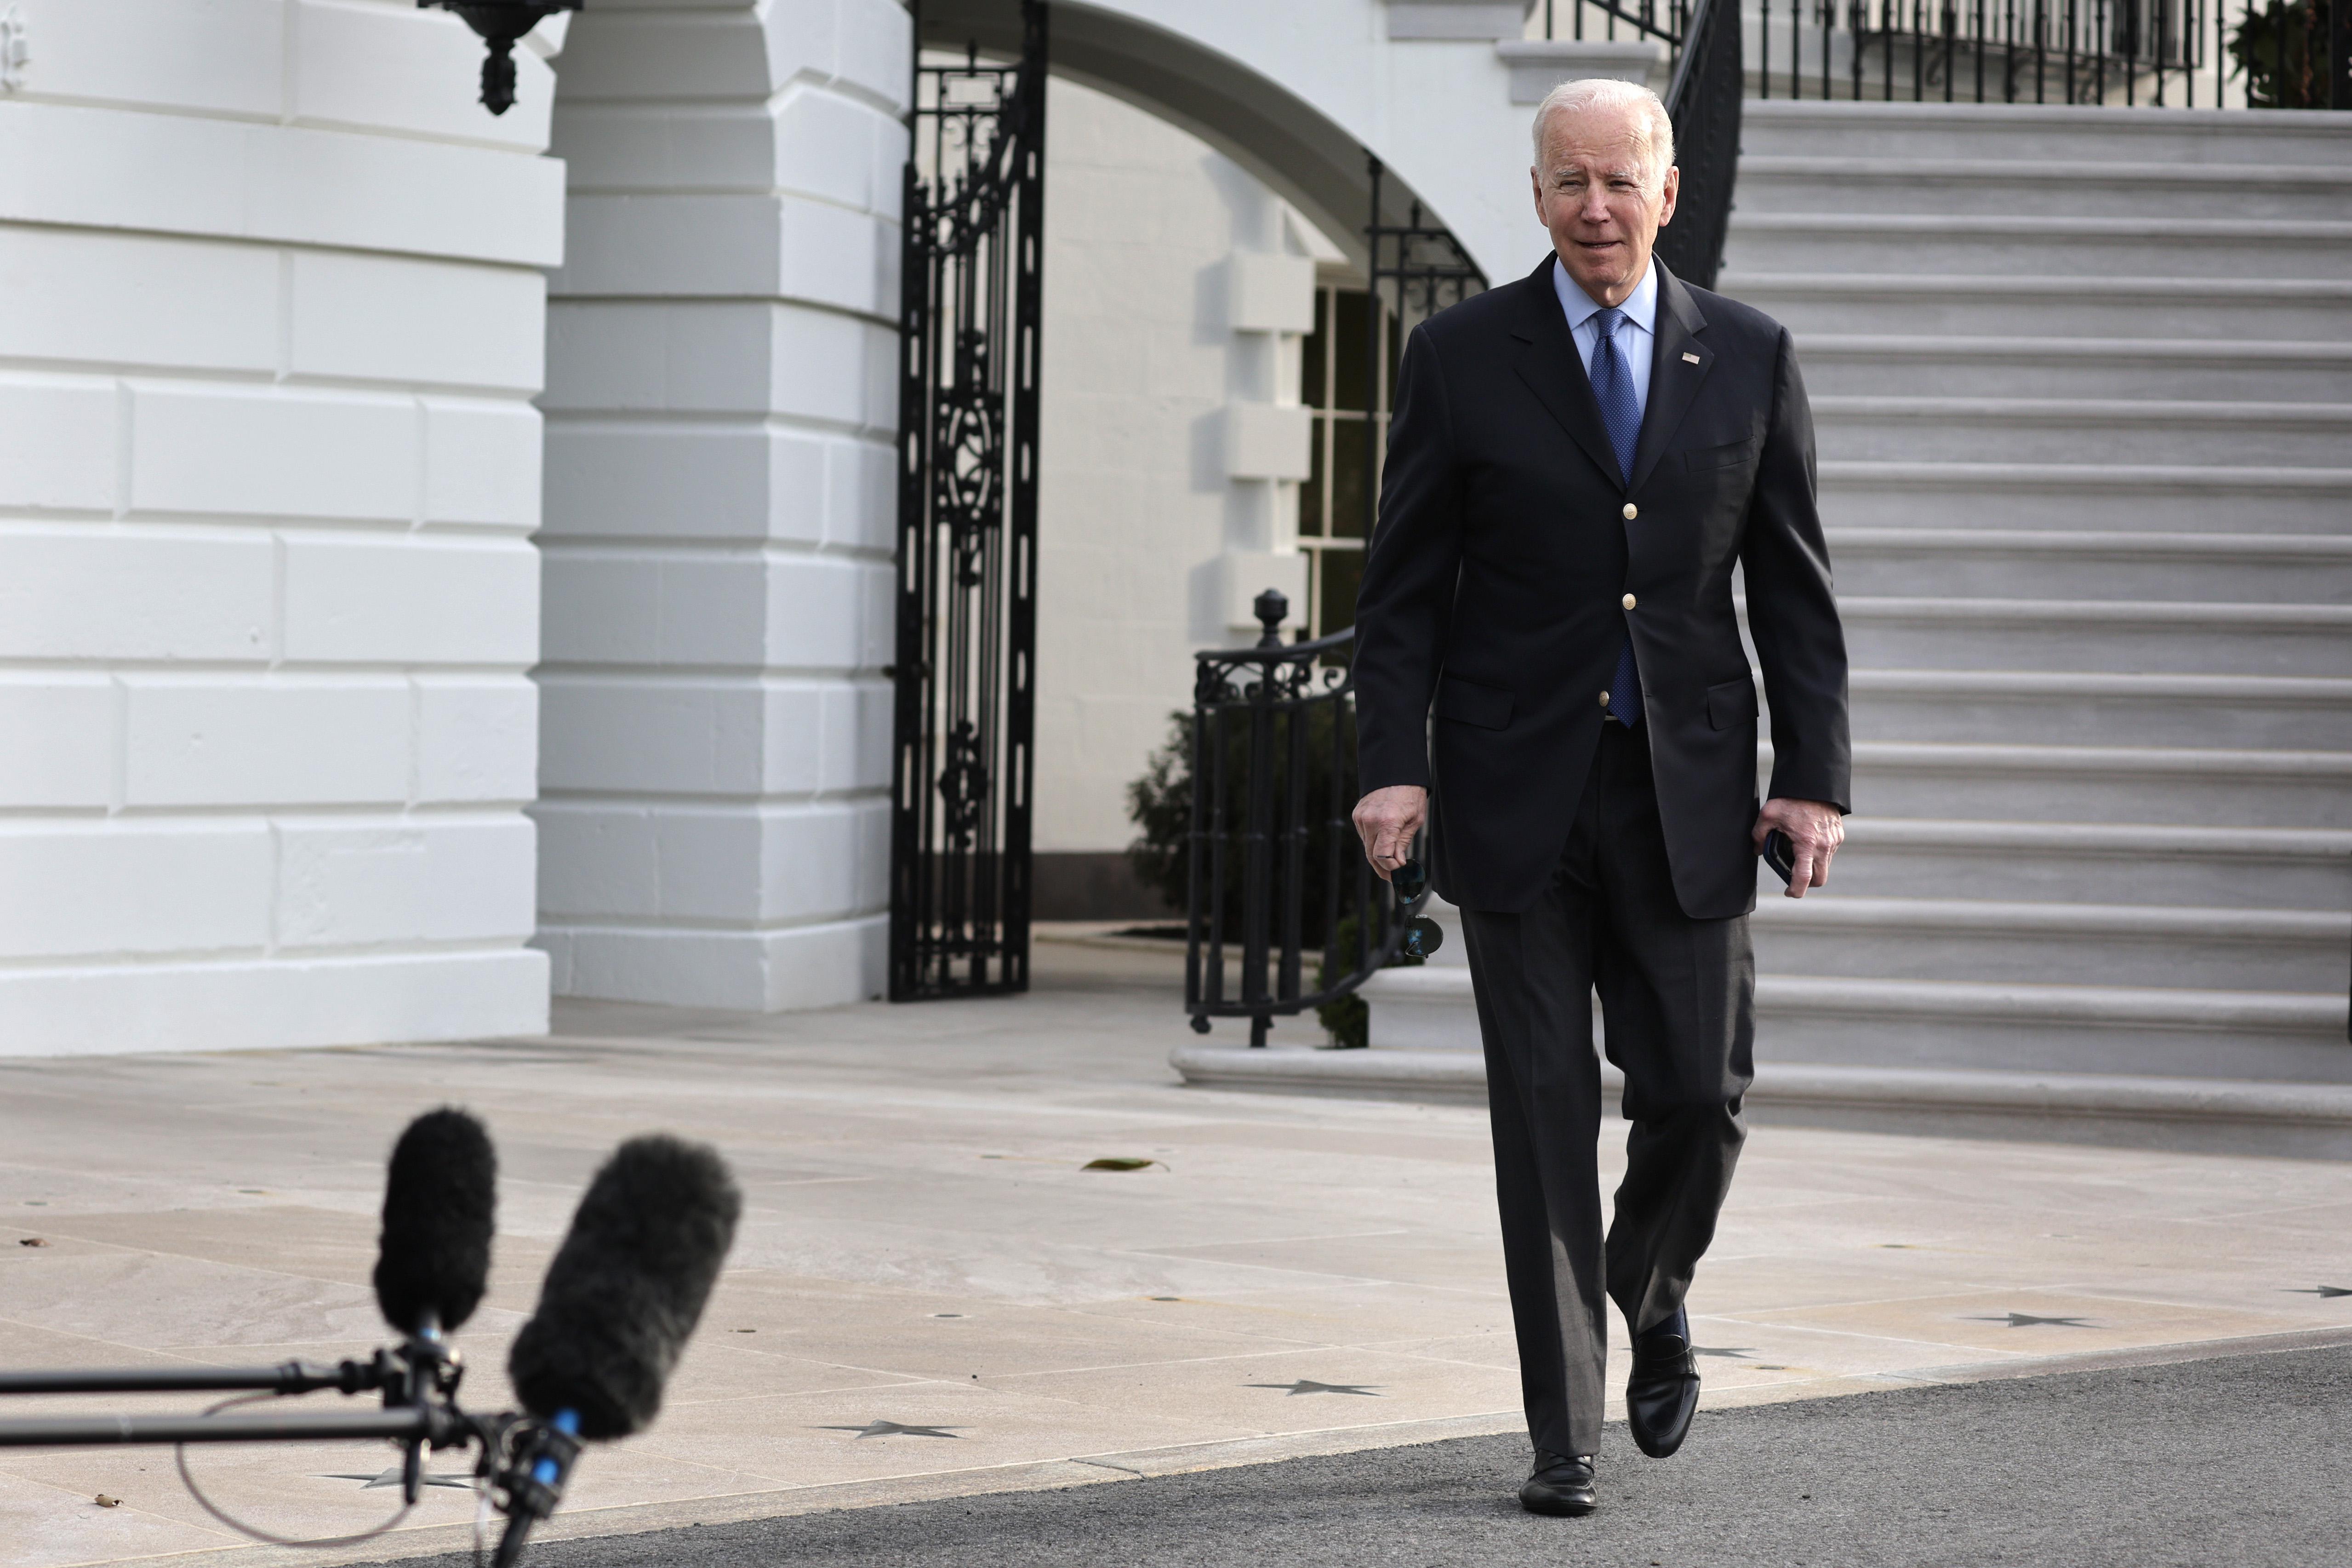 President Joe Biden walks toward members of the press prior to a Marine One departure from the White House on March 23, 2022 in Washington, D.C.